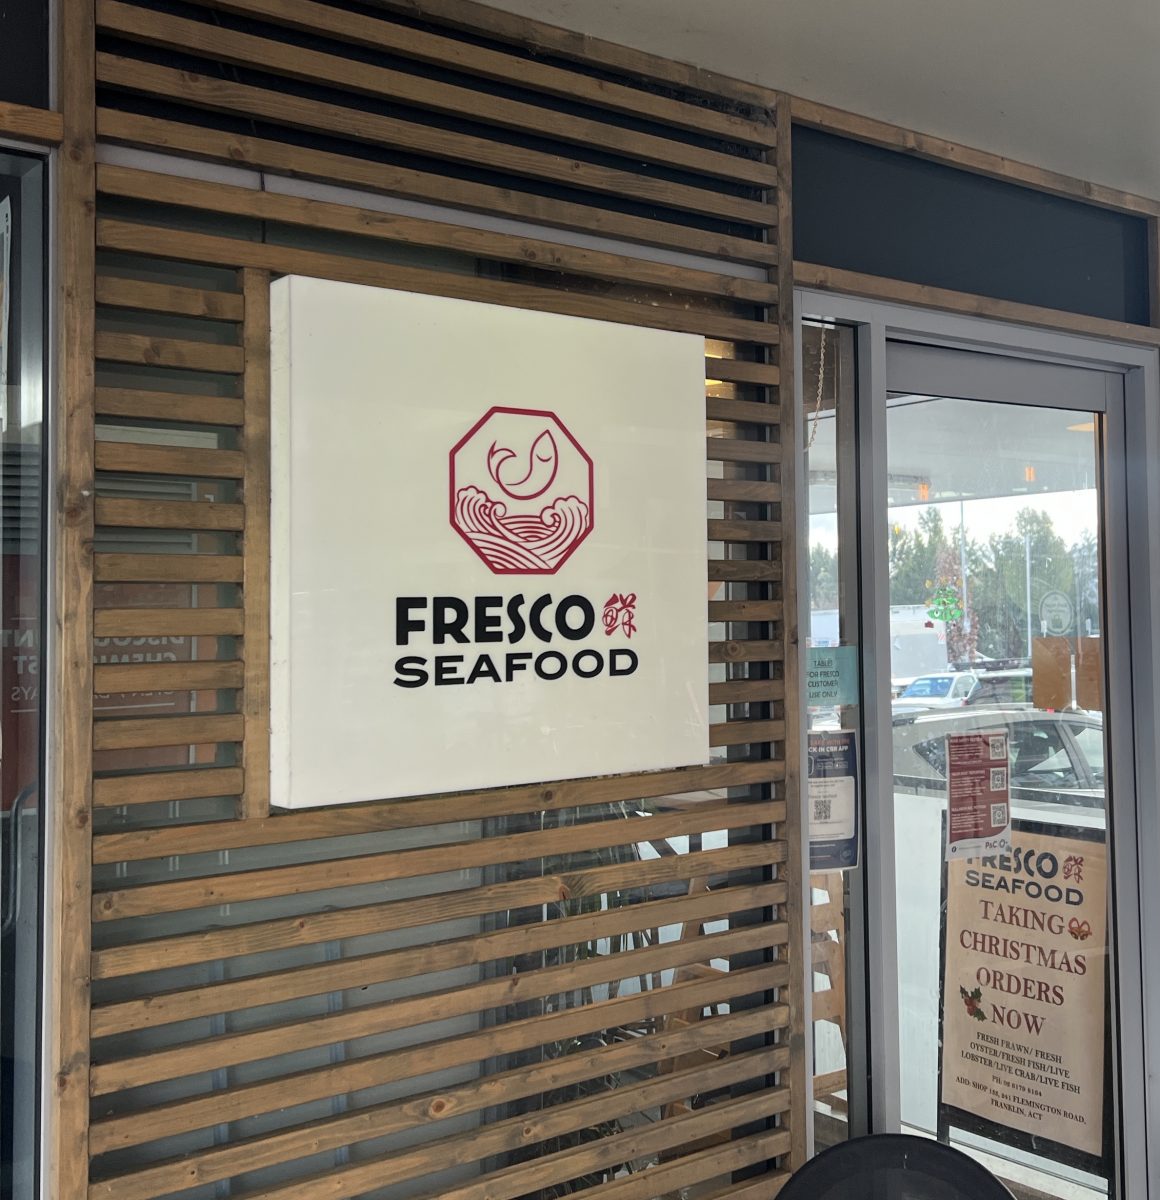 The front entrance to Fresco Seafoods with the Franklin carpark in the background.